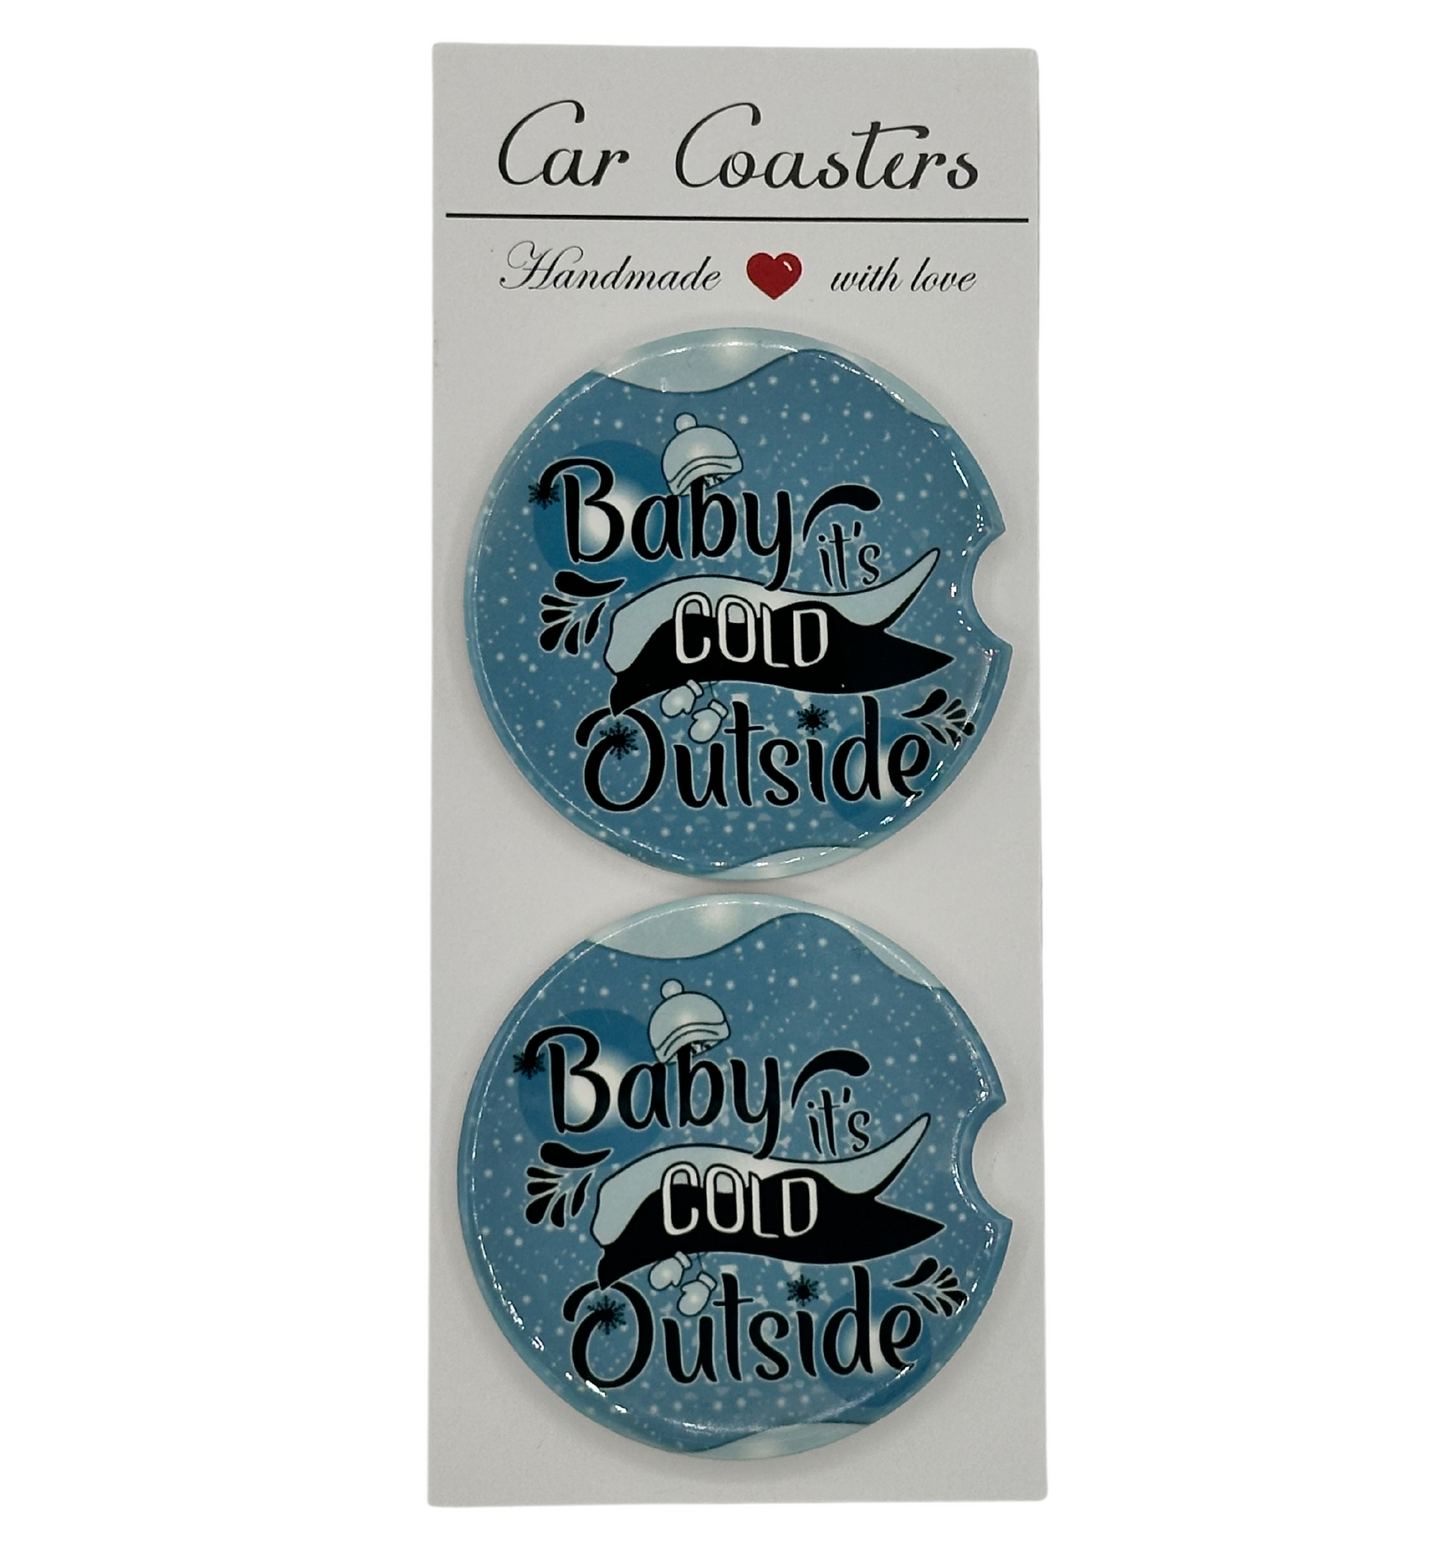 Baby It's Cold Outside Car Coasters | Set of 2